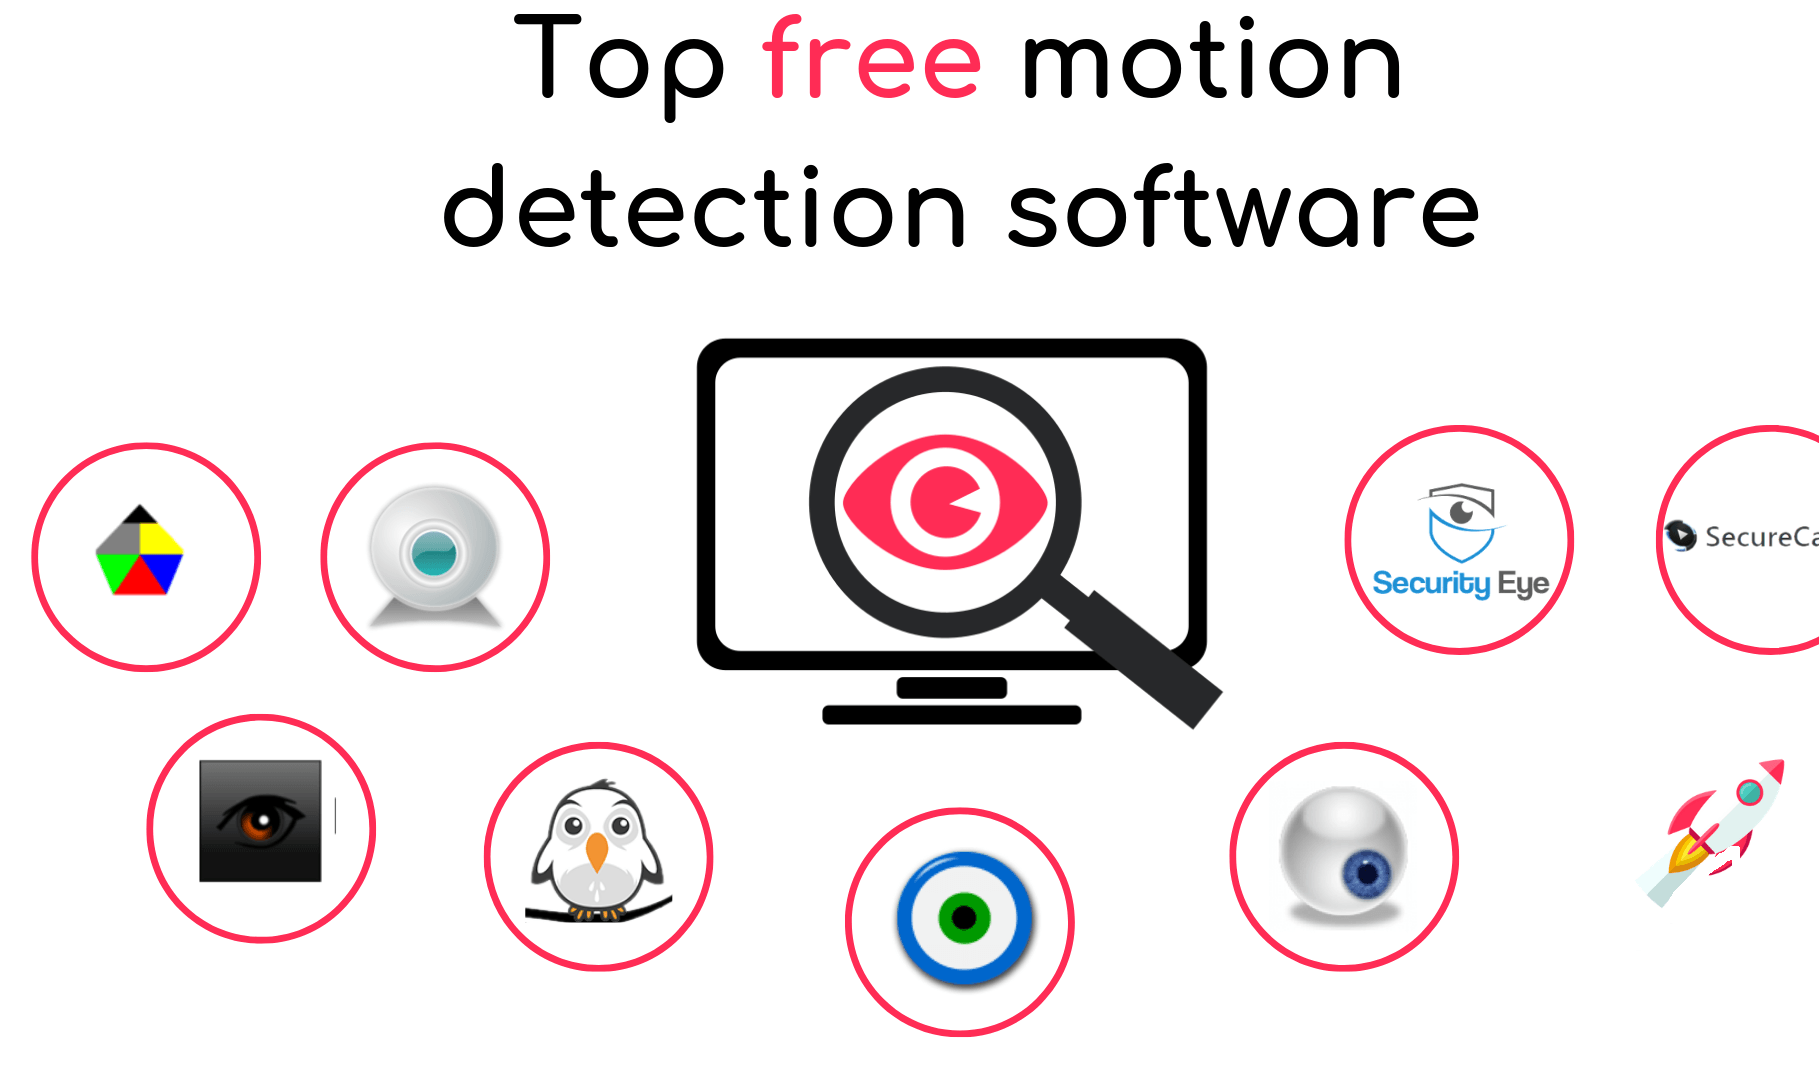 motion detection software